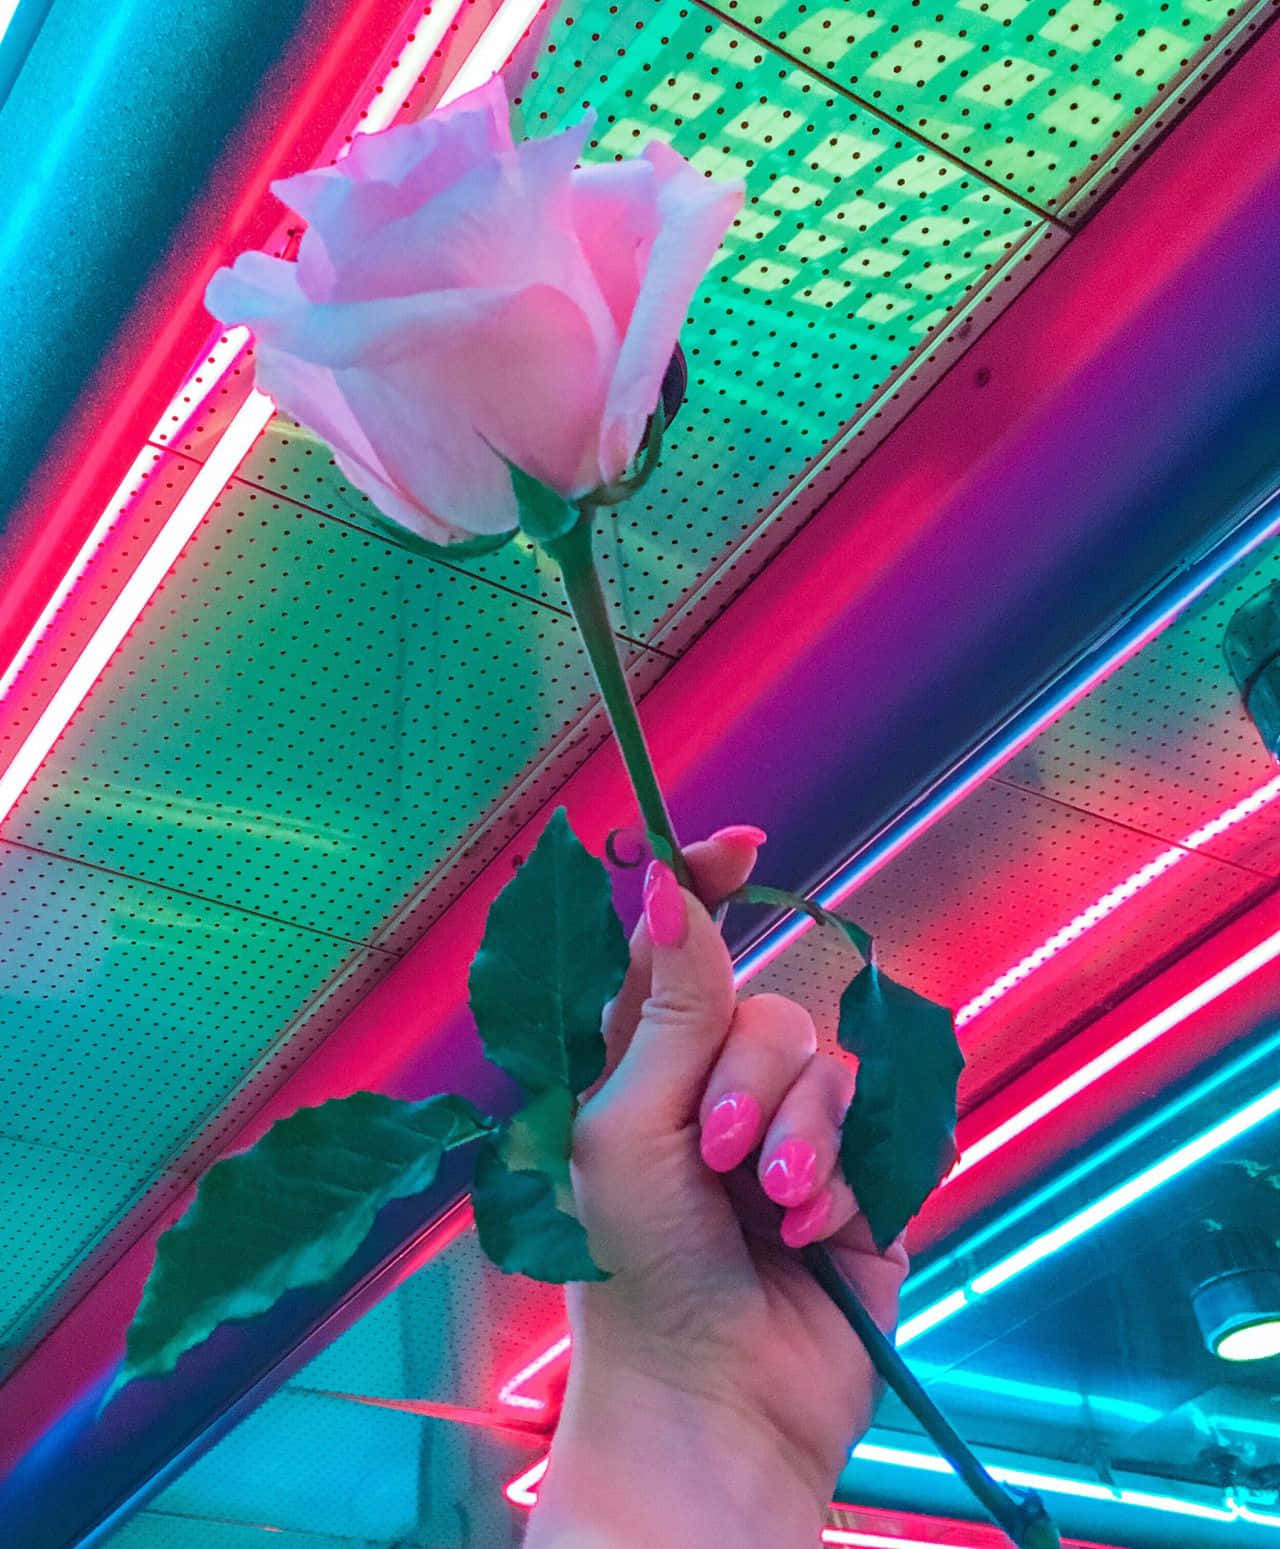 A colorful dreamscape of a Neon Aesthetic